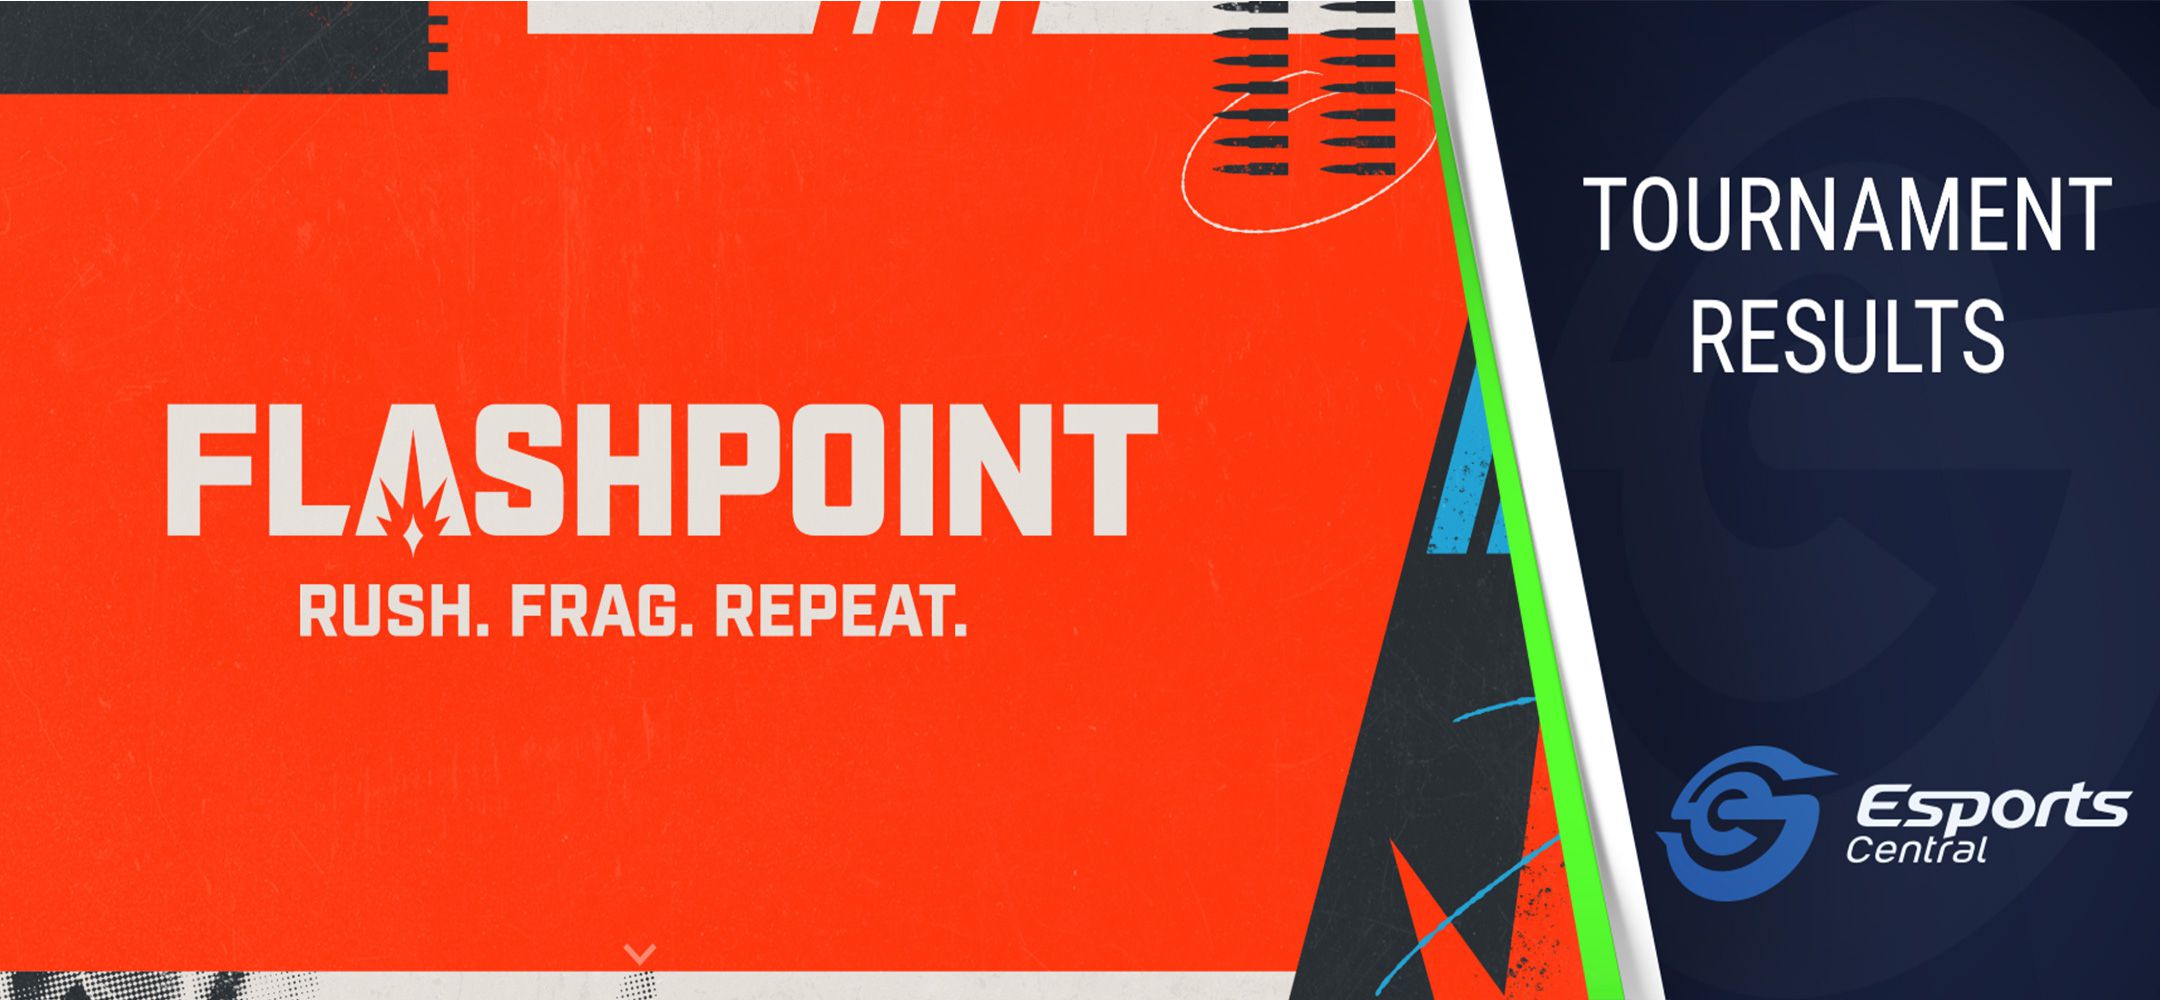 Flashpoint Season 3 finals highlights and full results - Esports Central